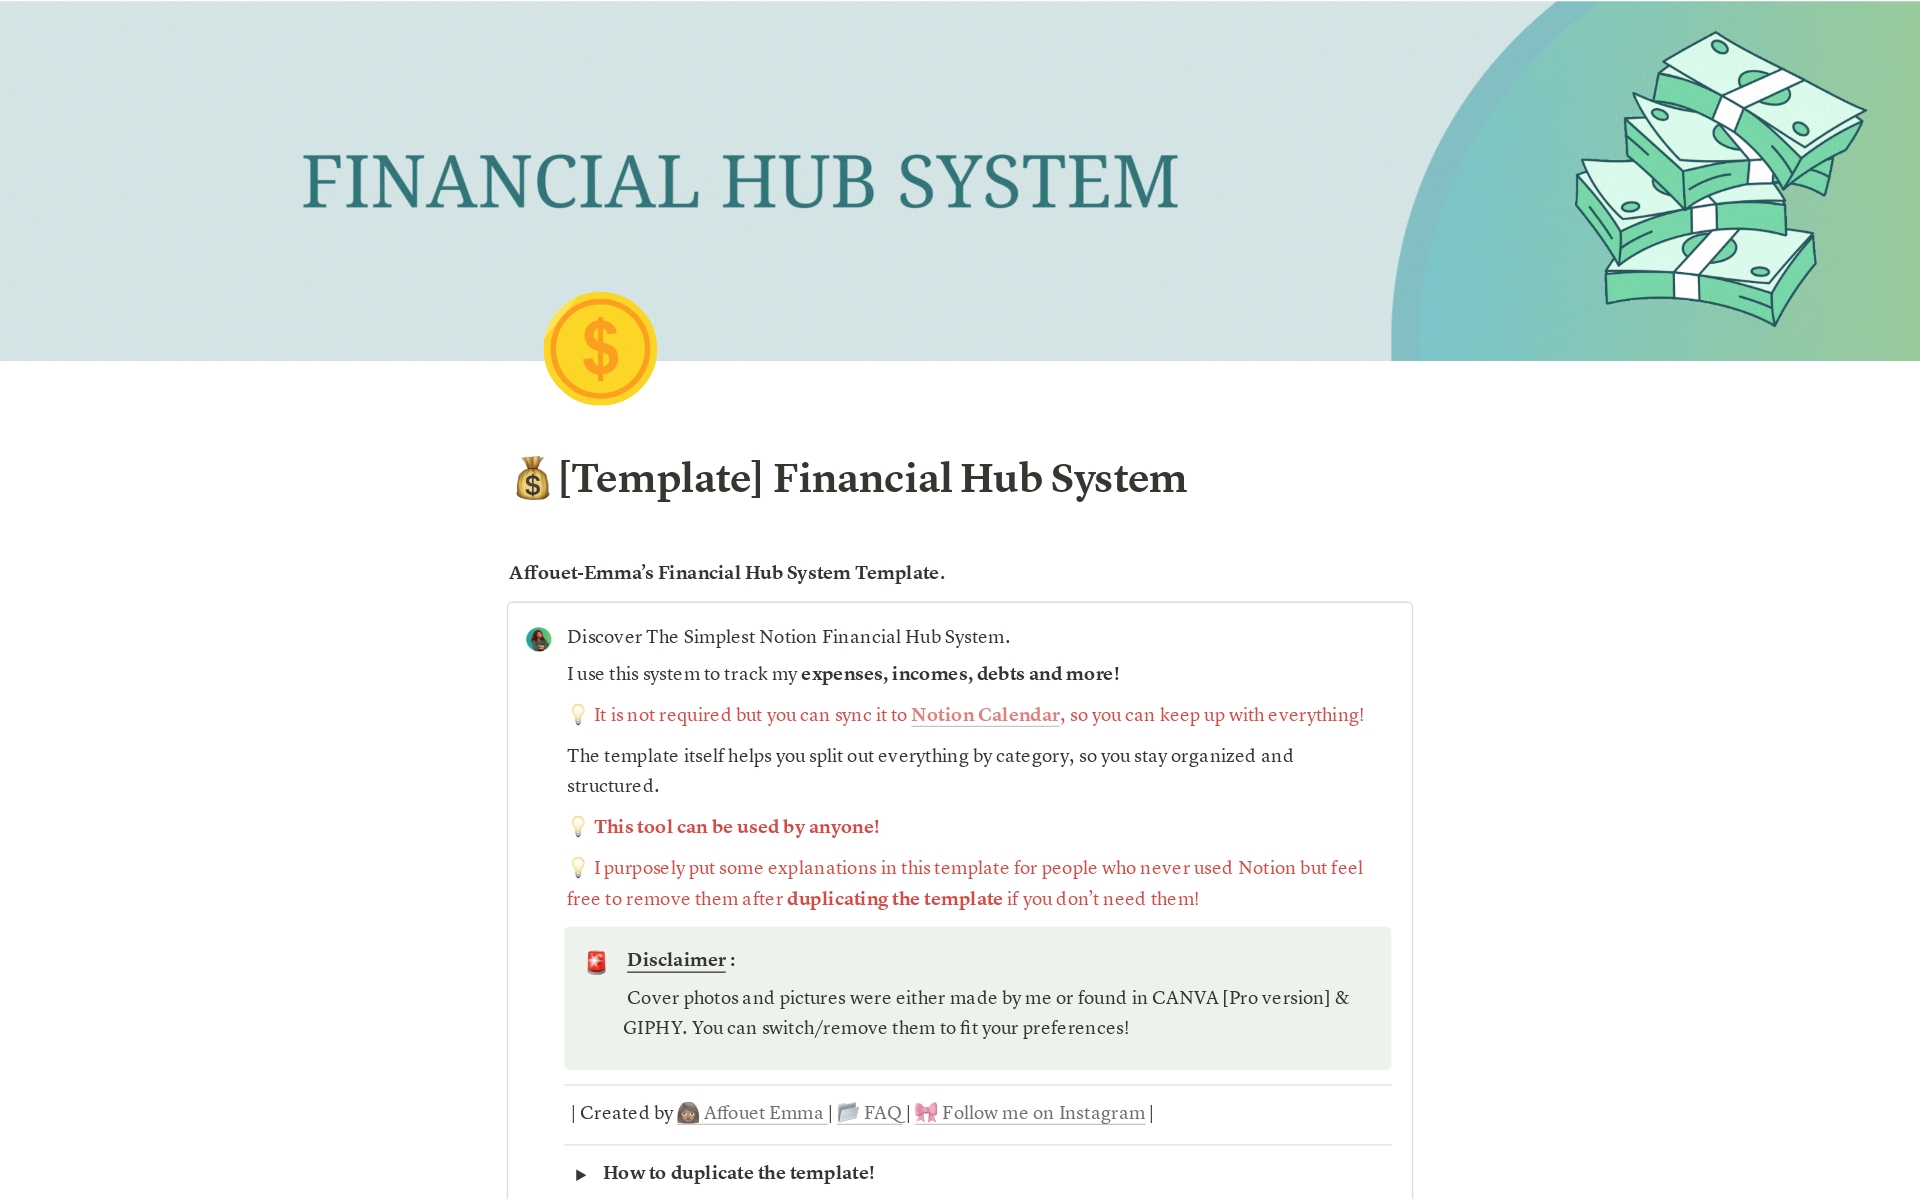 🎉 Discover The Simplest Notion Financial Hub System.
